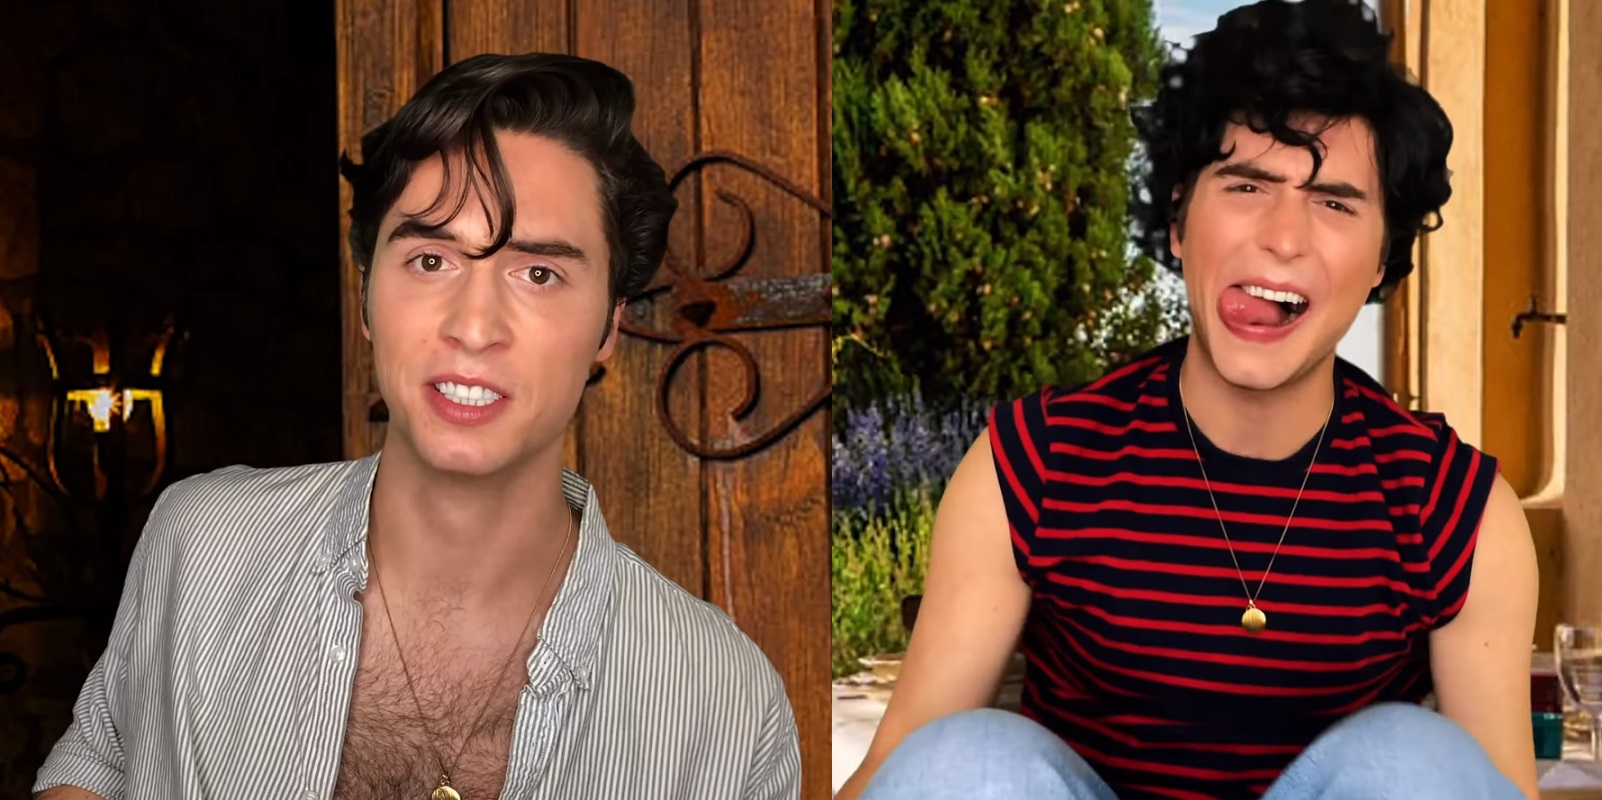 Hilarious fan-made trailer imagines the plot of Call Me by Your Name 2